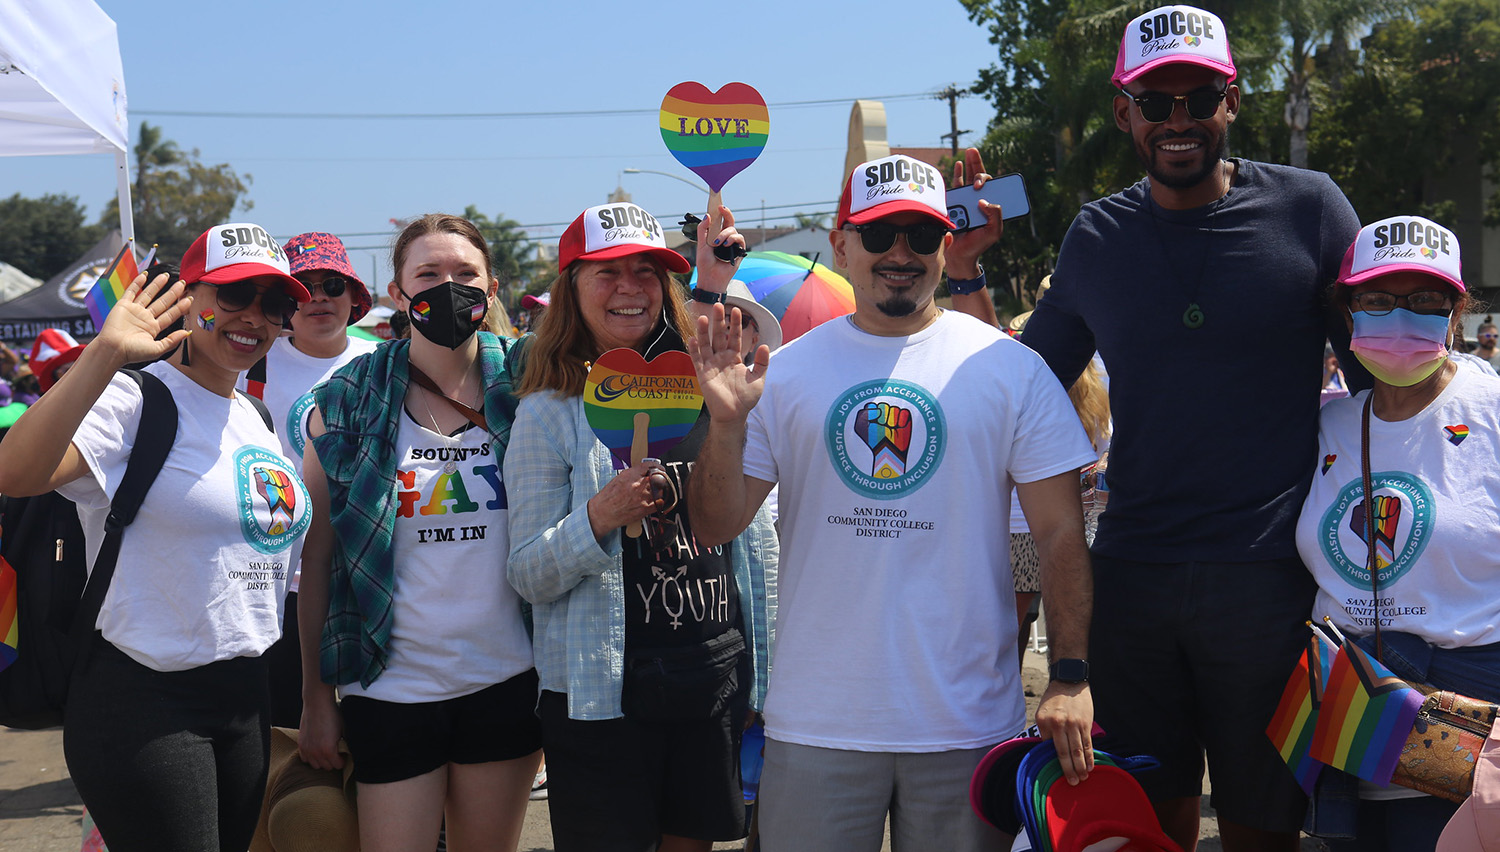 Six participants in the pride parade wave to the camera